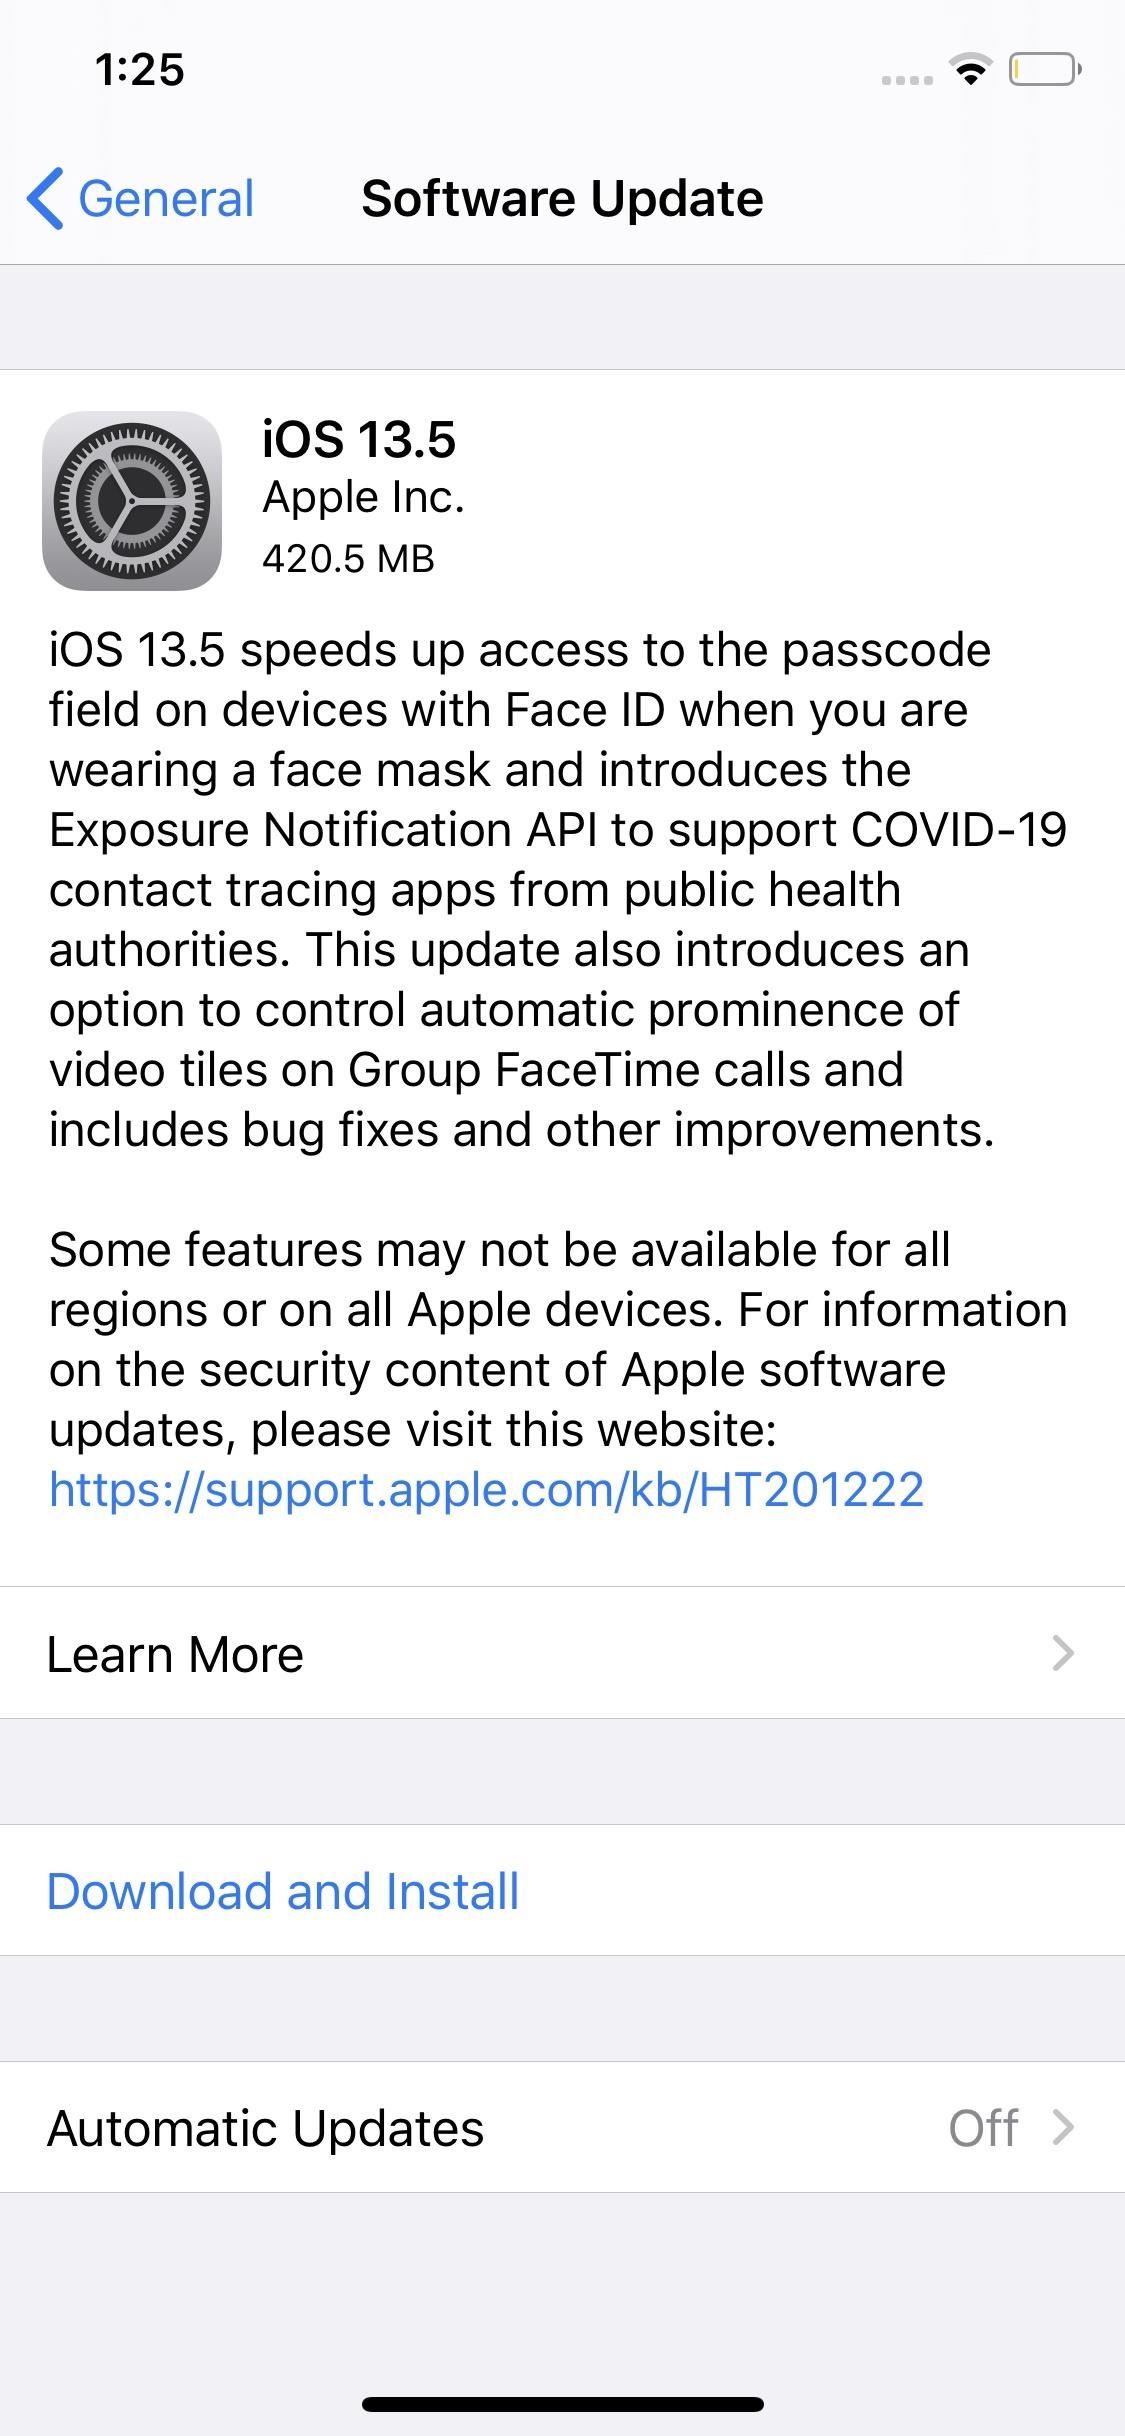 Apple Releases iOS 13.5, Includes COVID-19 Exposure Notifications, Face ID & FaceTime Updates